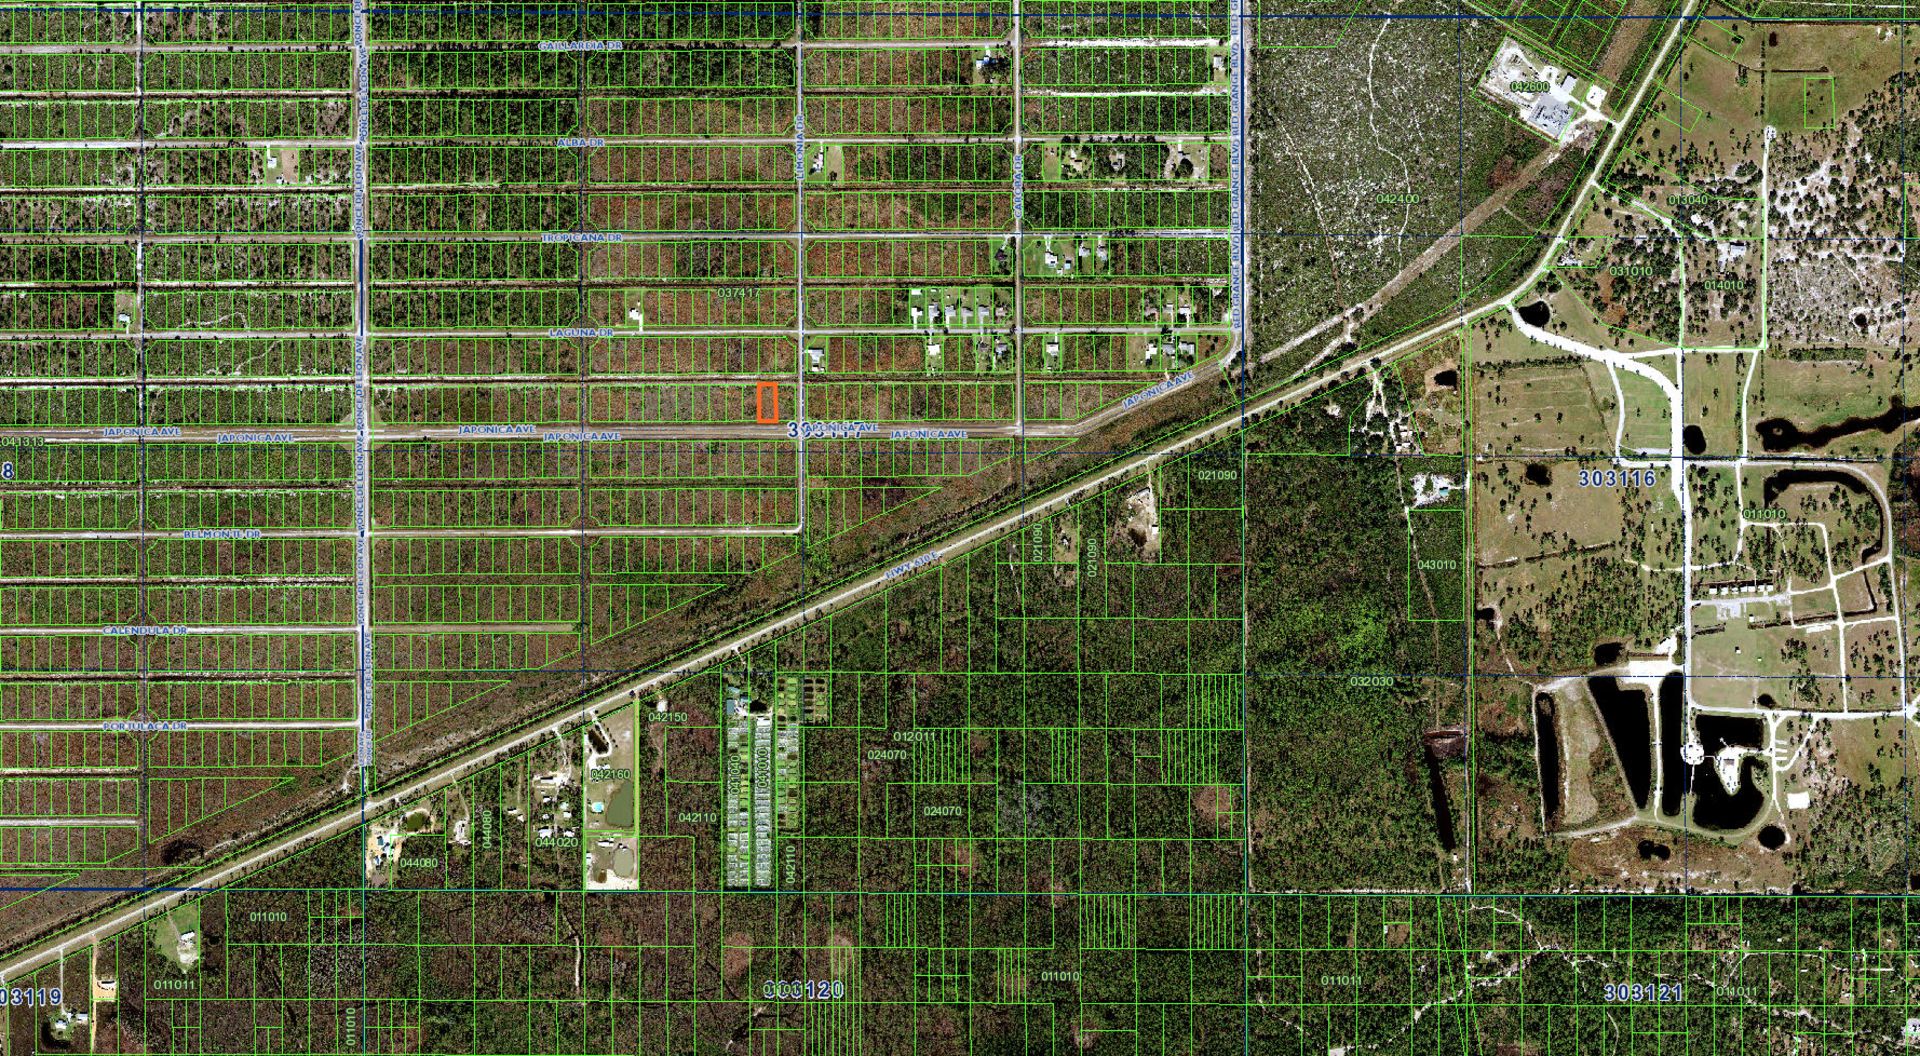 Build Your Central Florida Getaway on this Half-Acre Lot! - Image 3 of 11